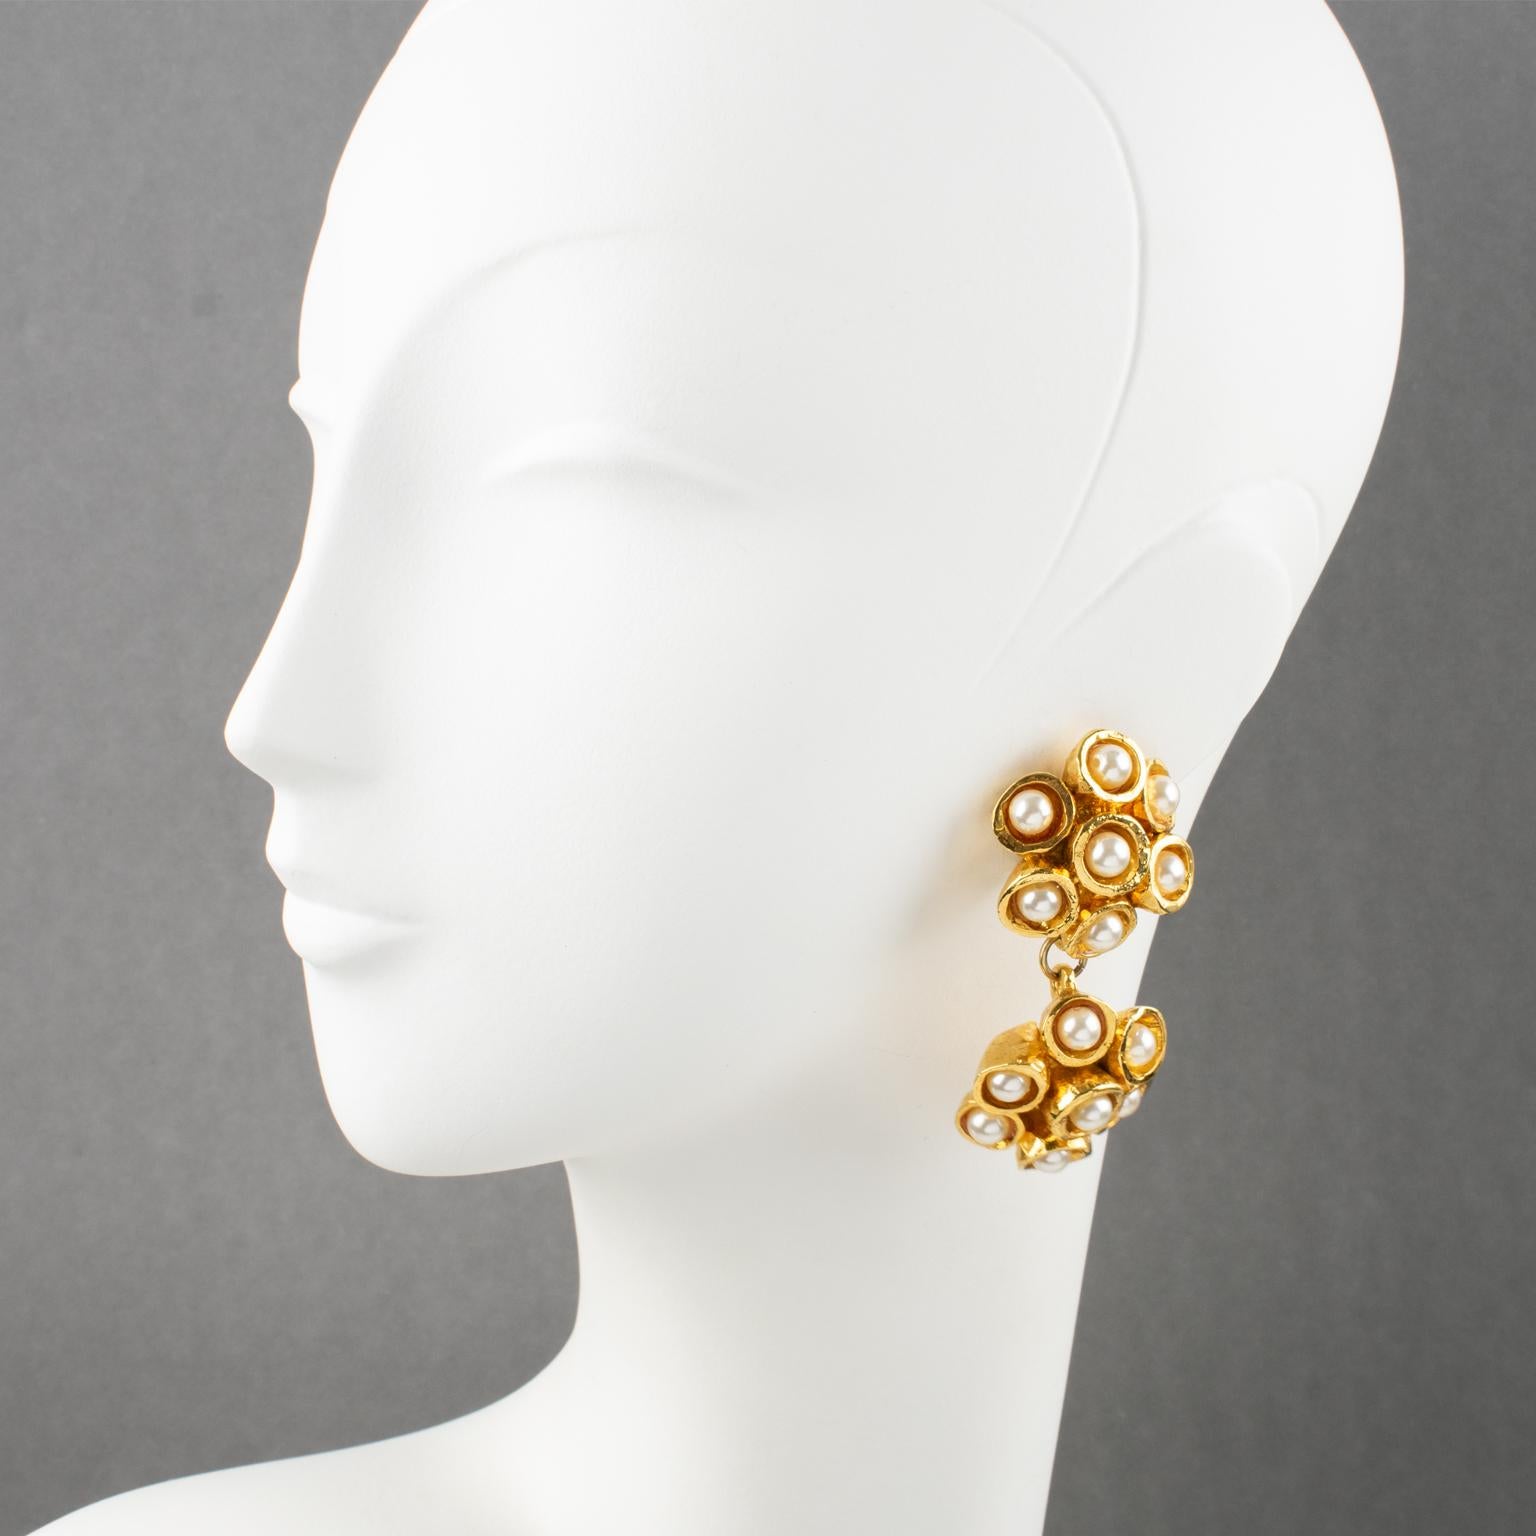 Lovely French designer Alexis Lahellec Paris dangling clip-on earrings. They feature an oversized floral design with gilt metal-coated resin framing, all textured and topped with pearl imitation beads. Signed at the back: 